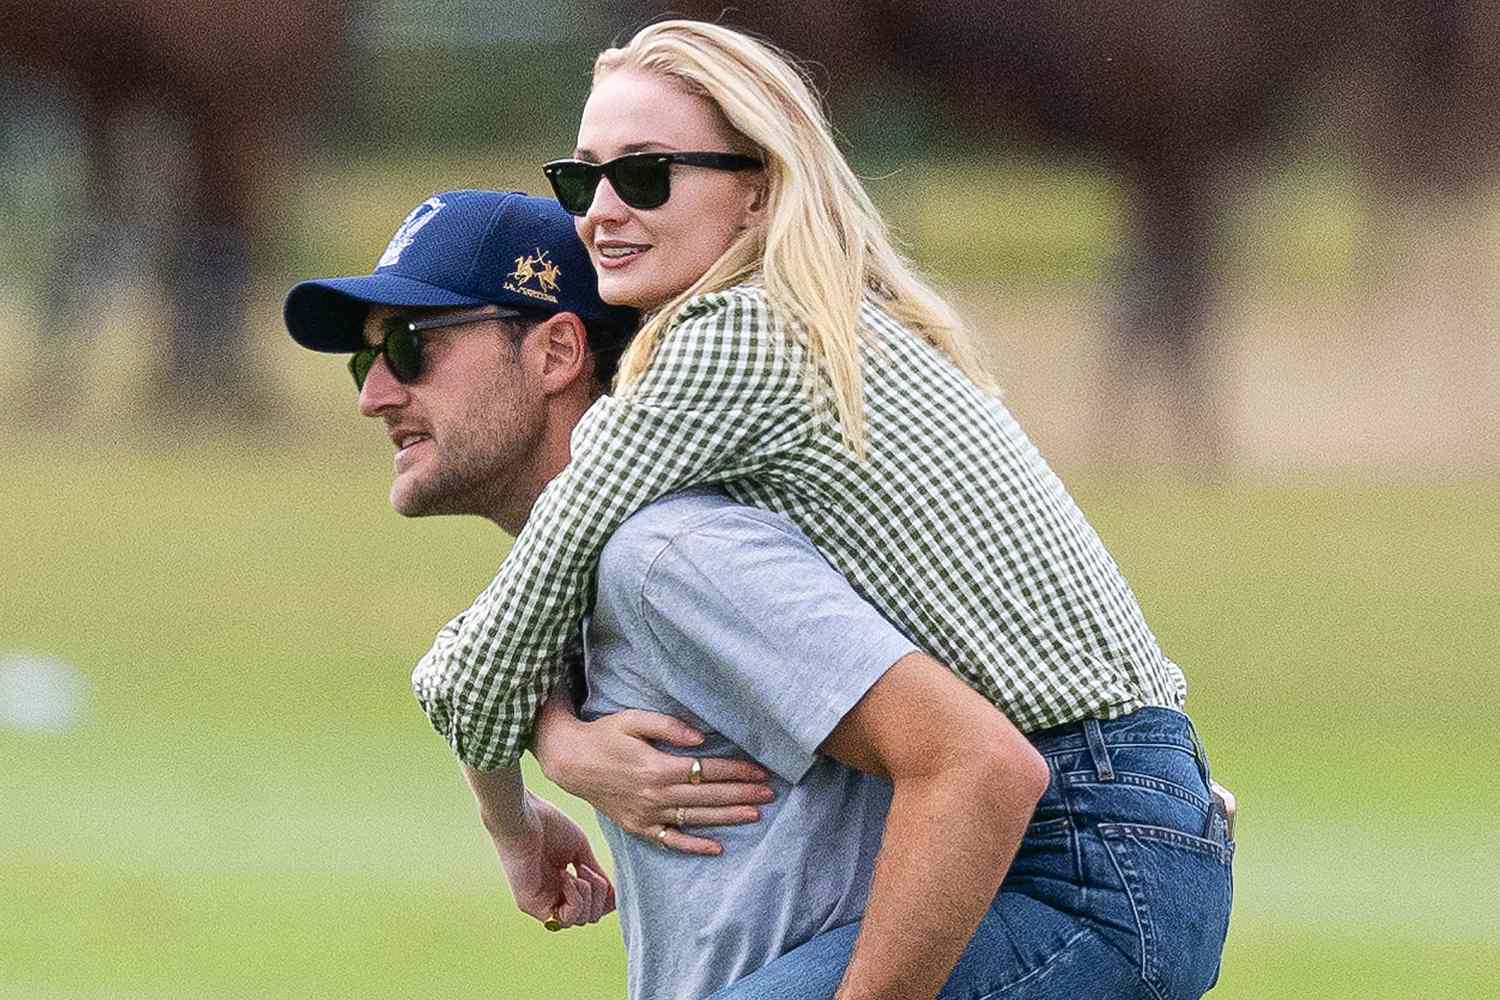 Sophie Turner Gets Piggyback Ride From Boyfriend Peregrine Pearson During Polo Outing at His Family's Estate